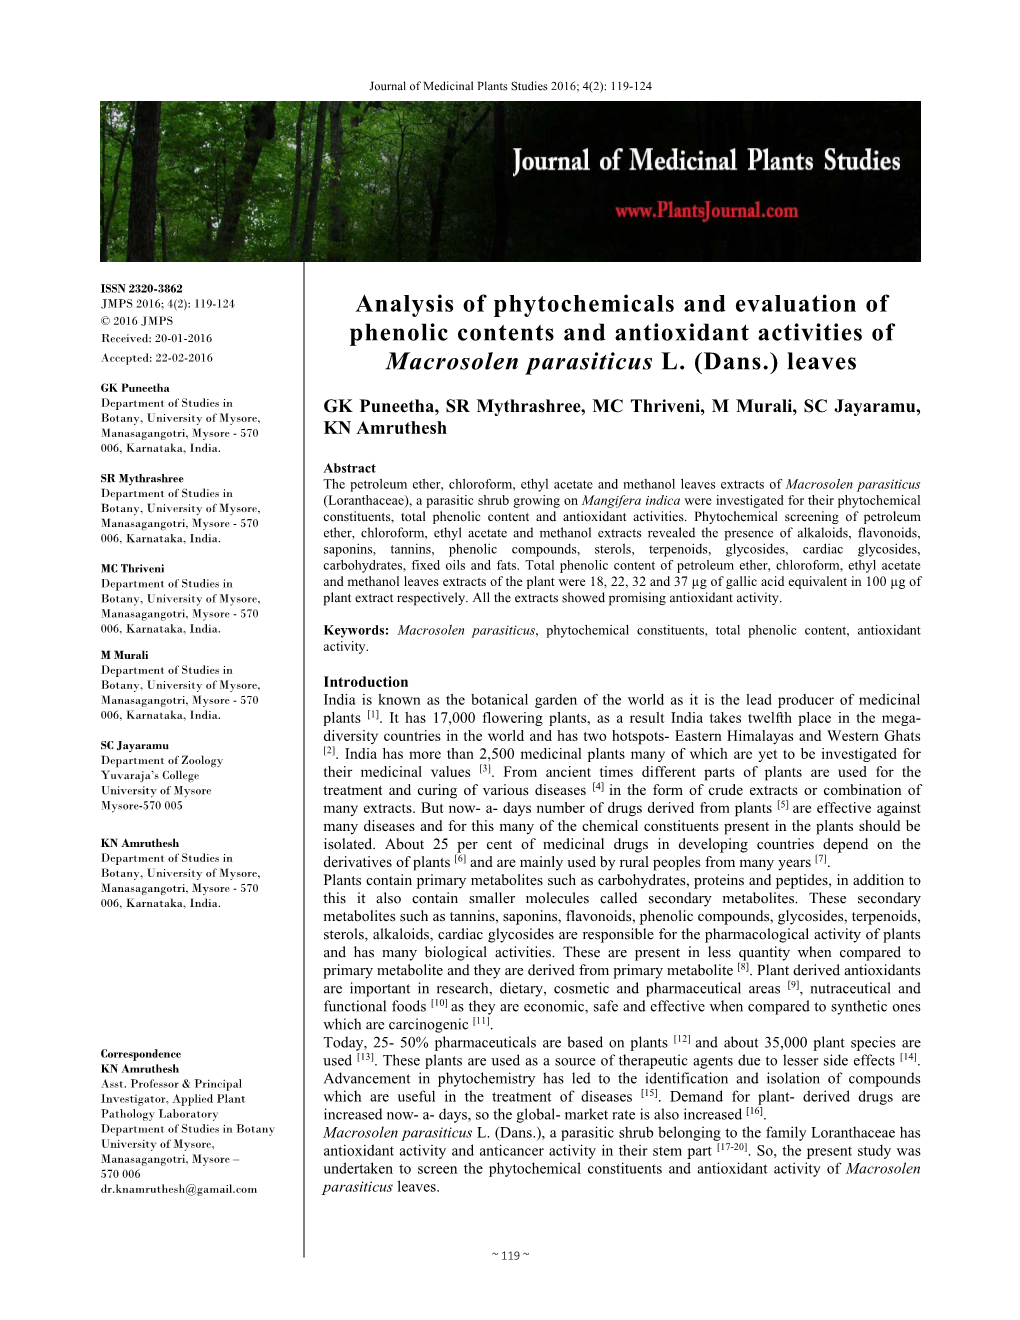 Analysis of Phytochemicals and Evaluation of Phenolic Contents And